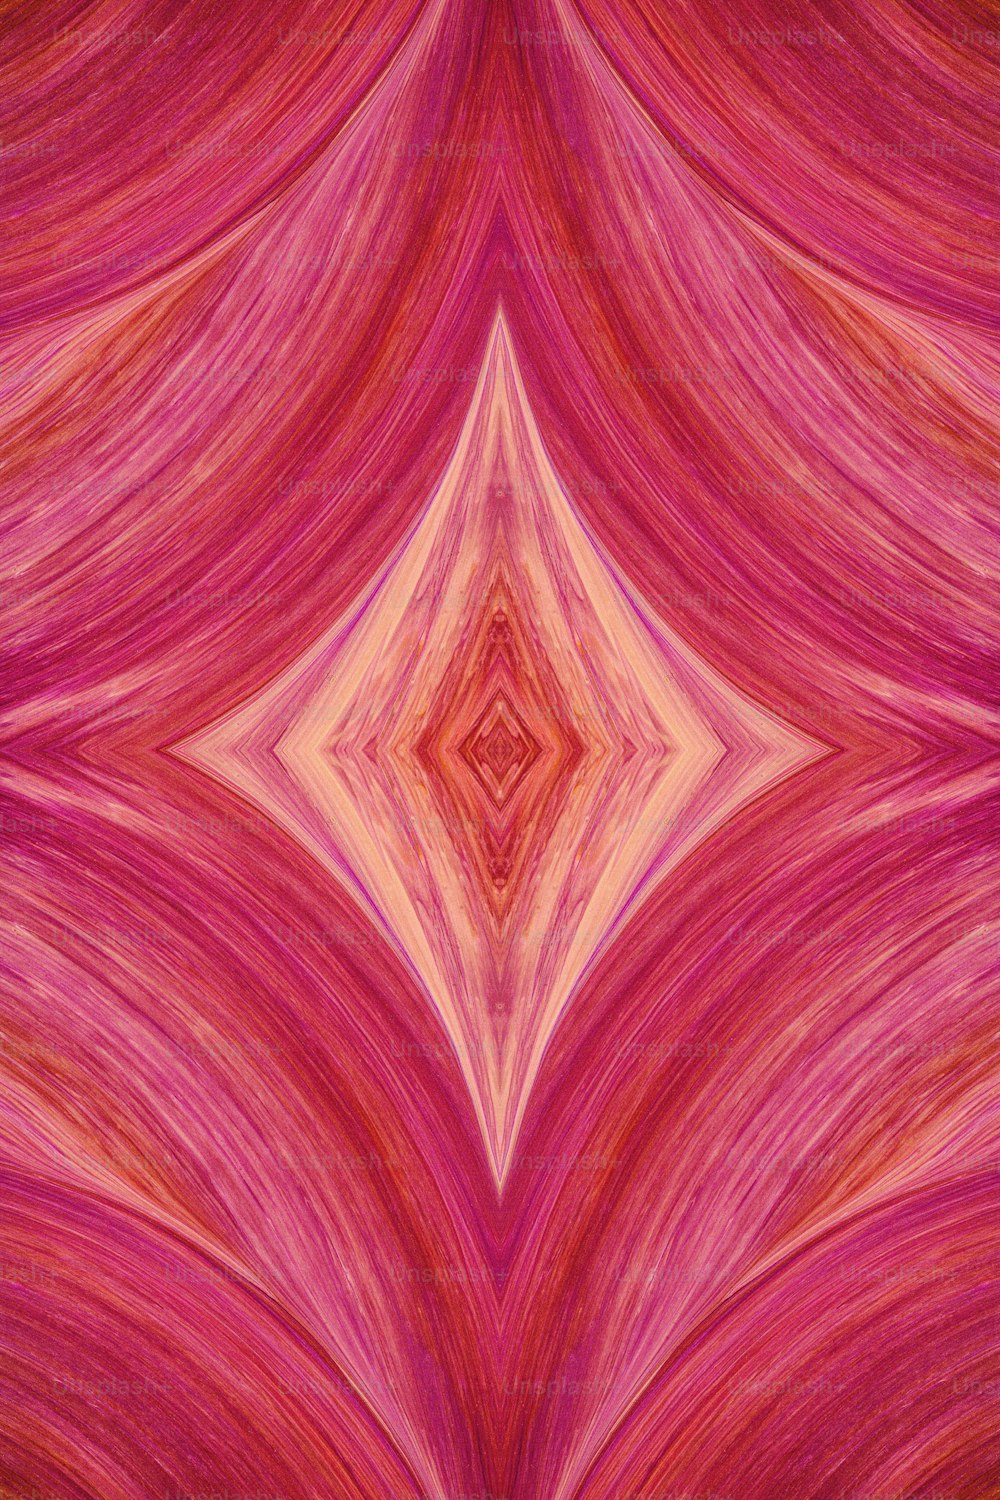 a pink and red abstract background with a star pattern